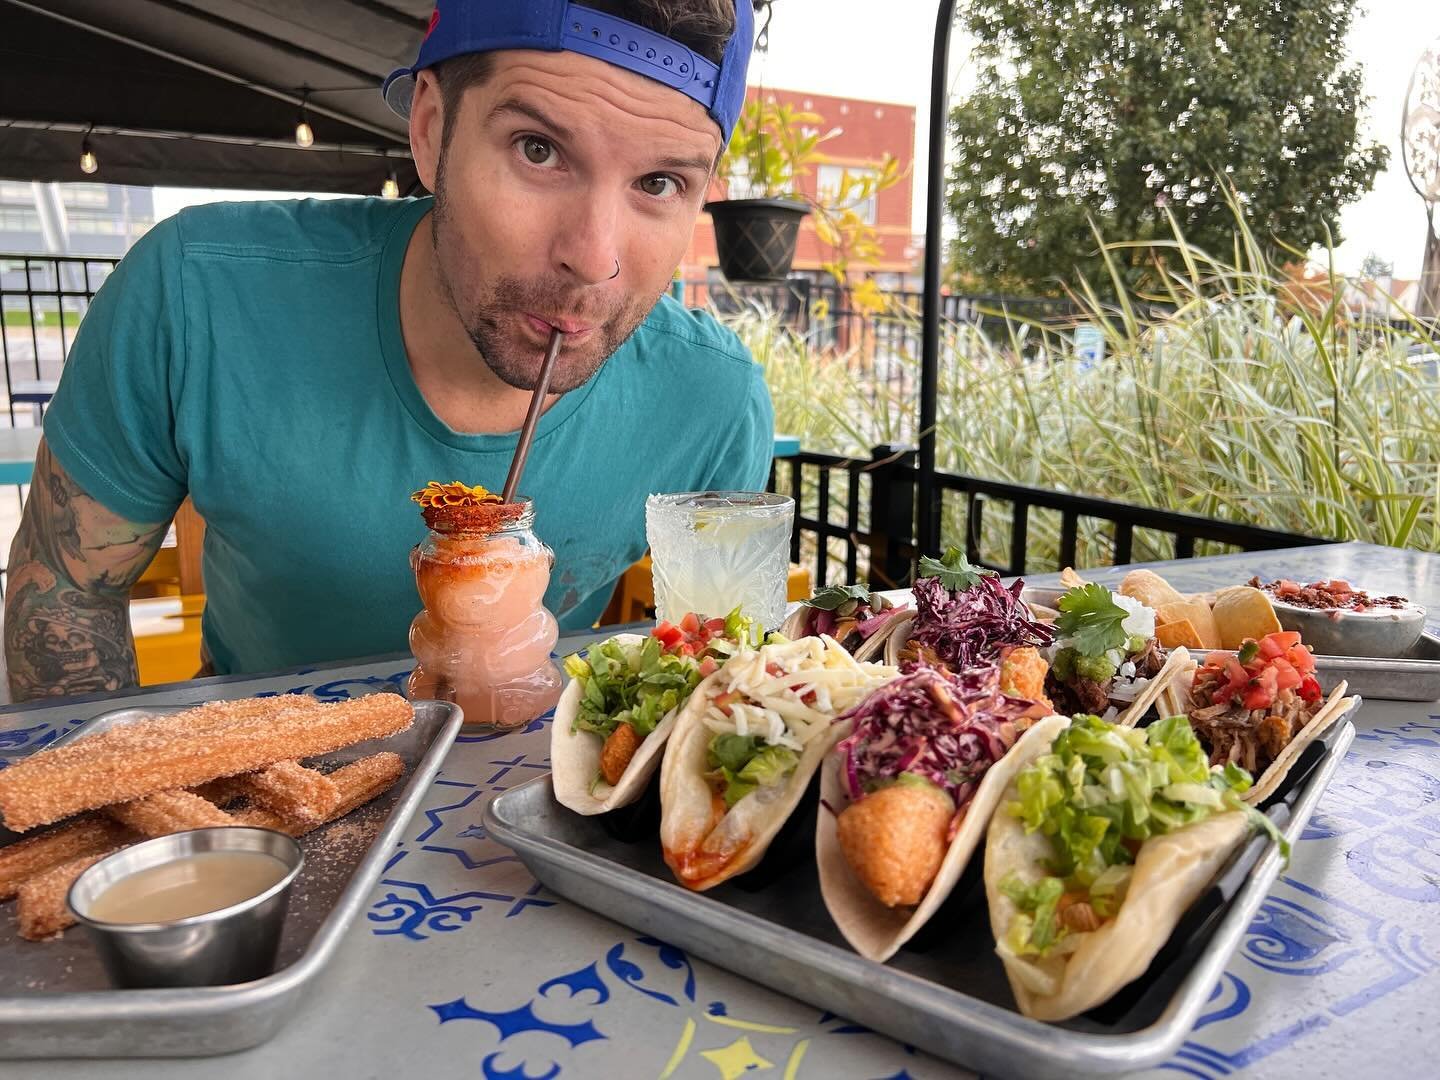 Happy Hour just hits better on the patio. ☀️ 🌮 🥑